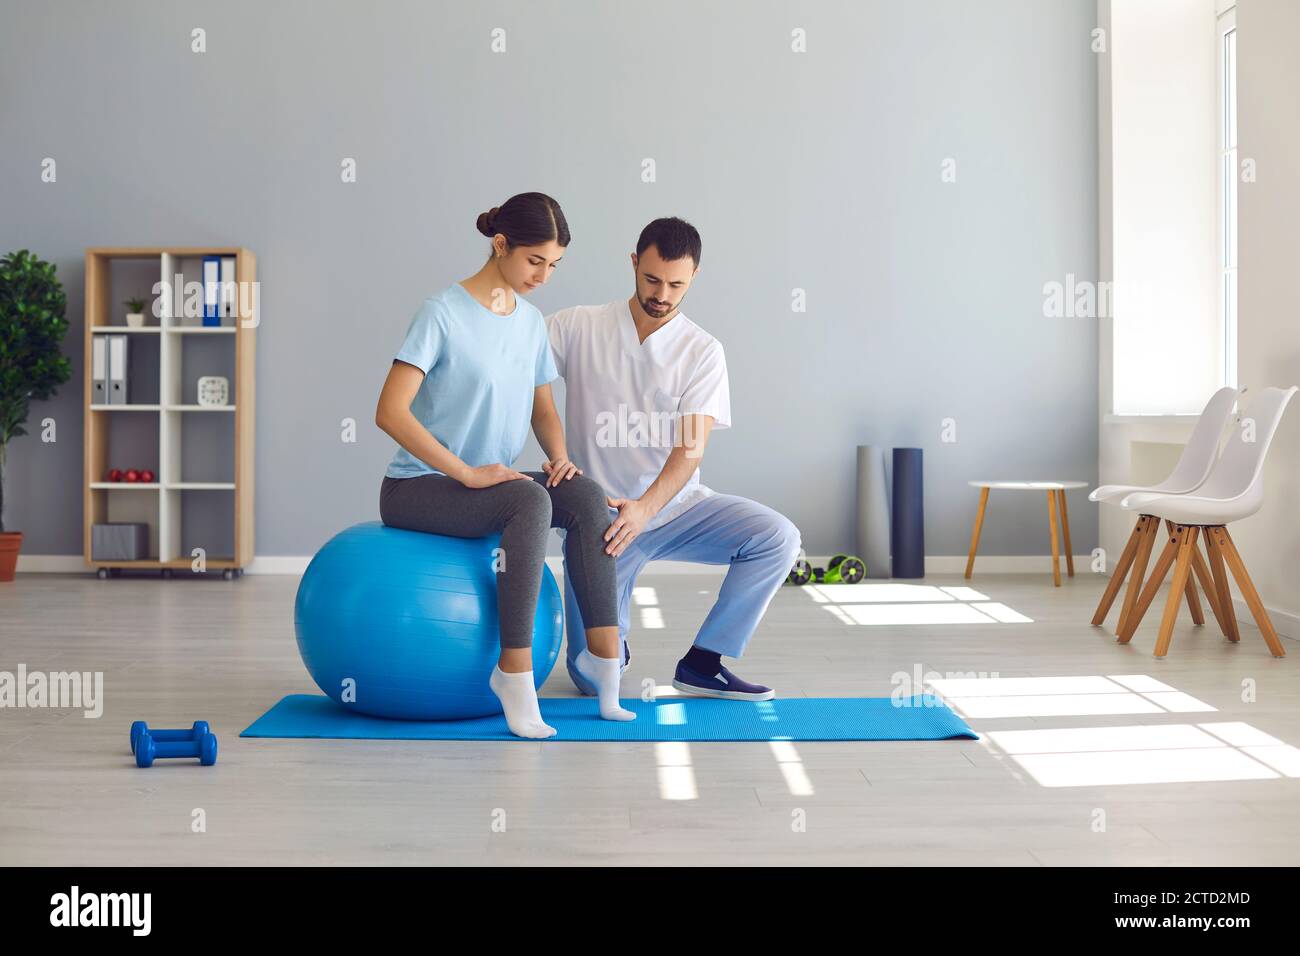 Man doctor chiropractor fixing woman on fitness ball in right position for pain relief Stock Photo